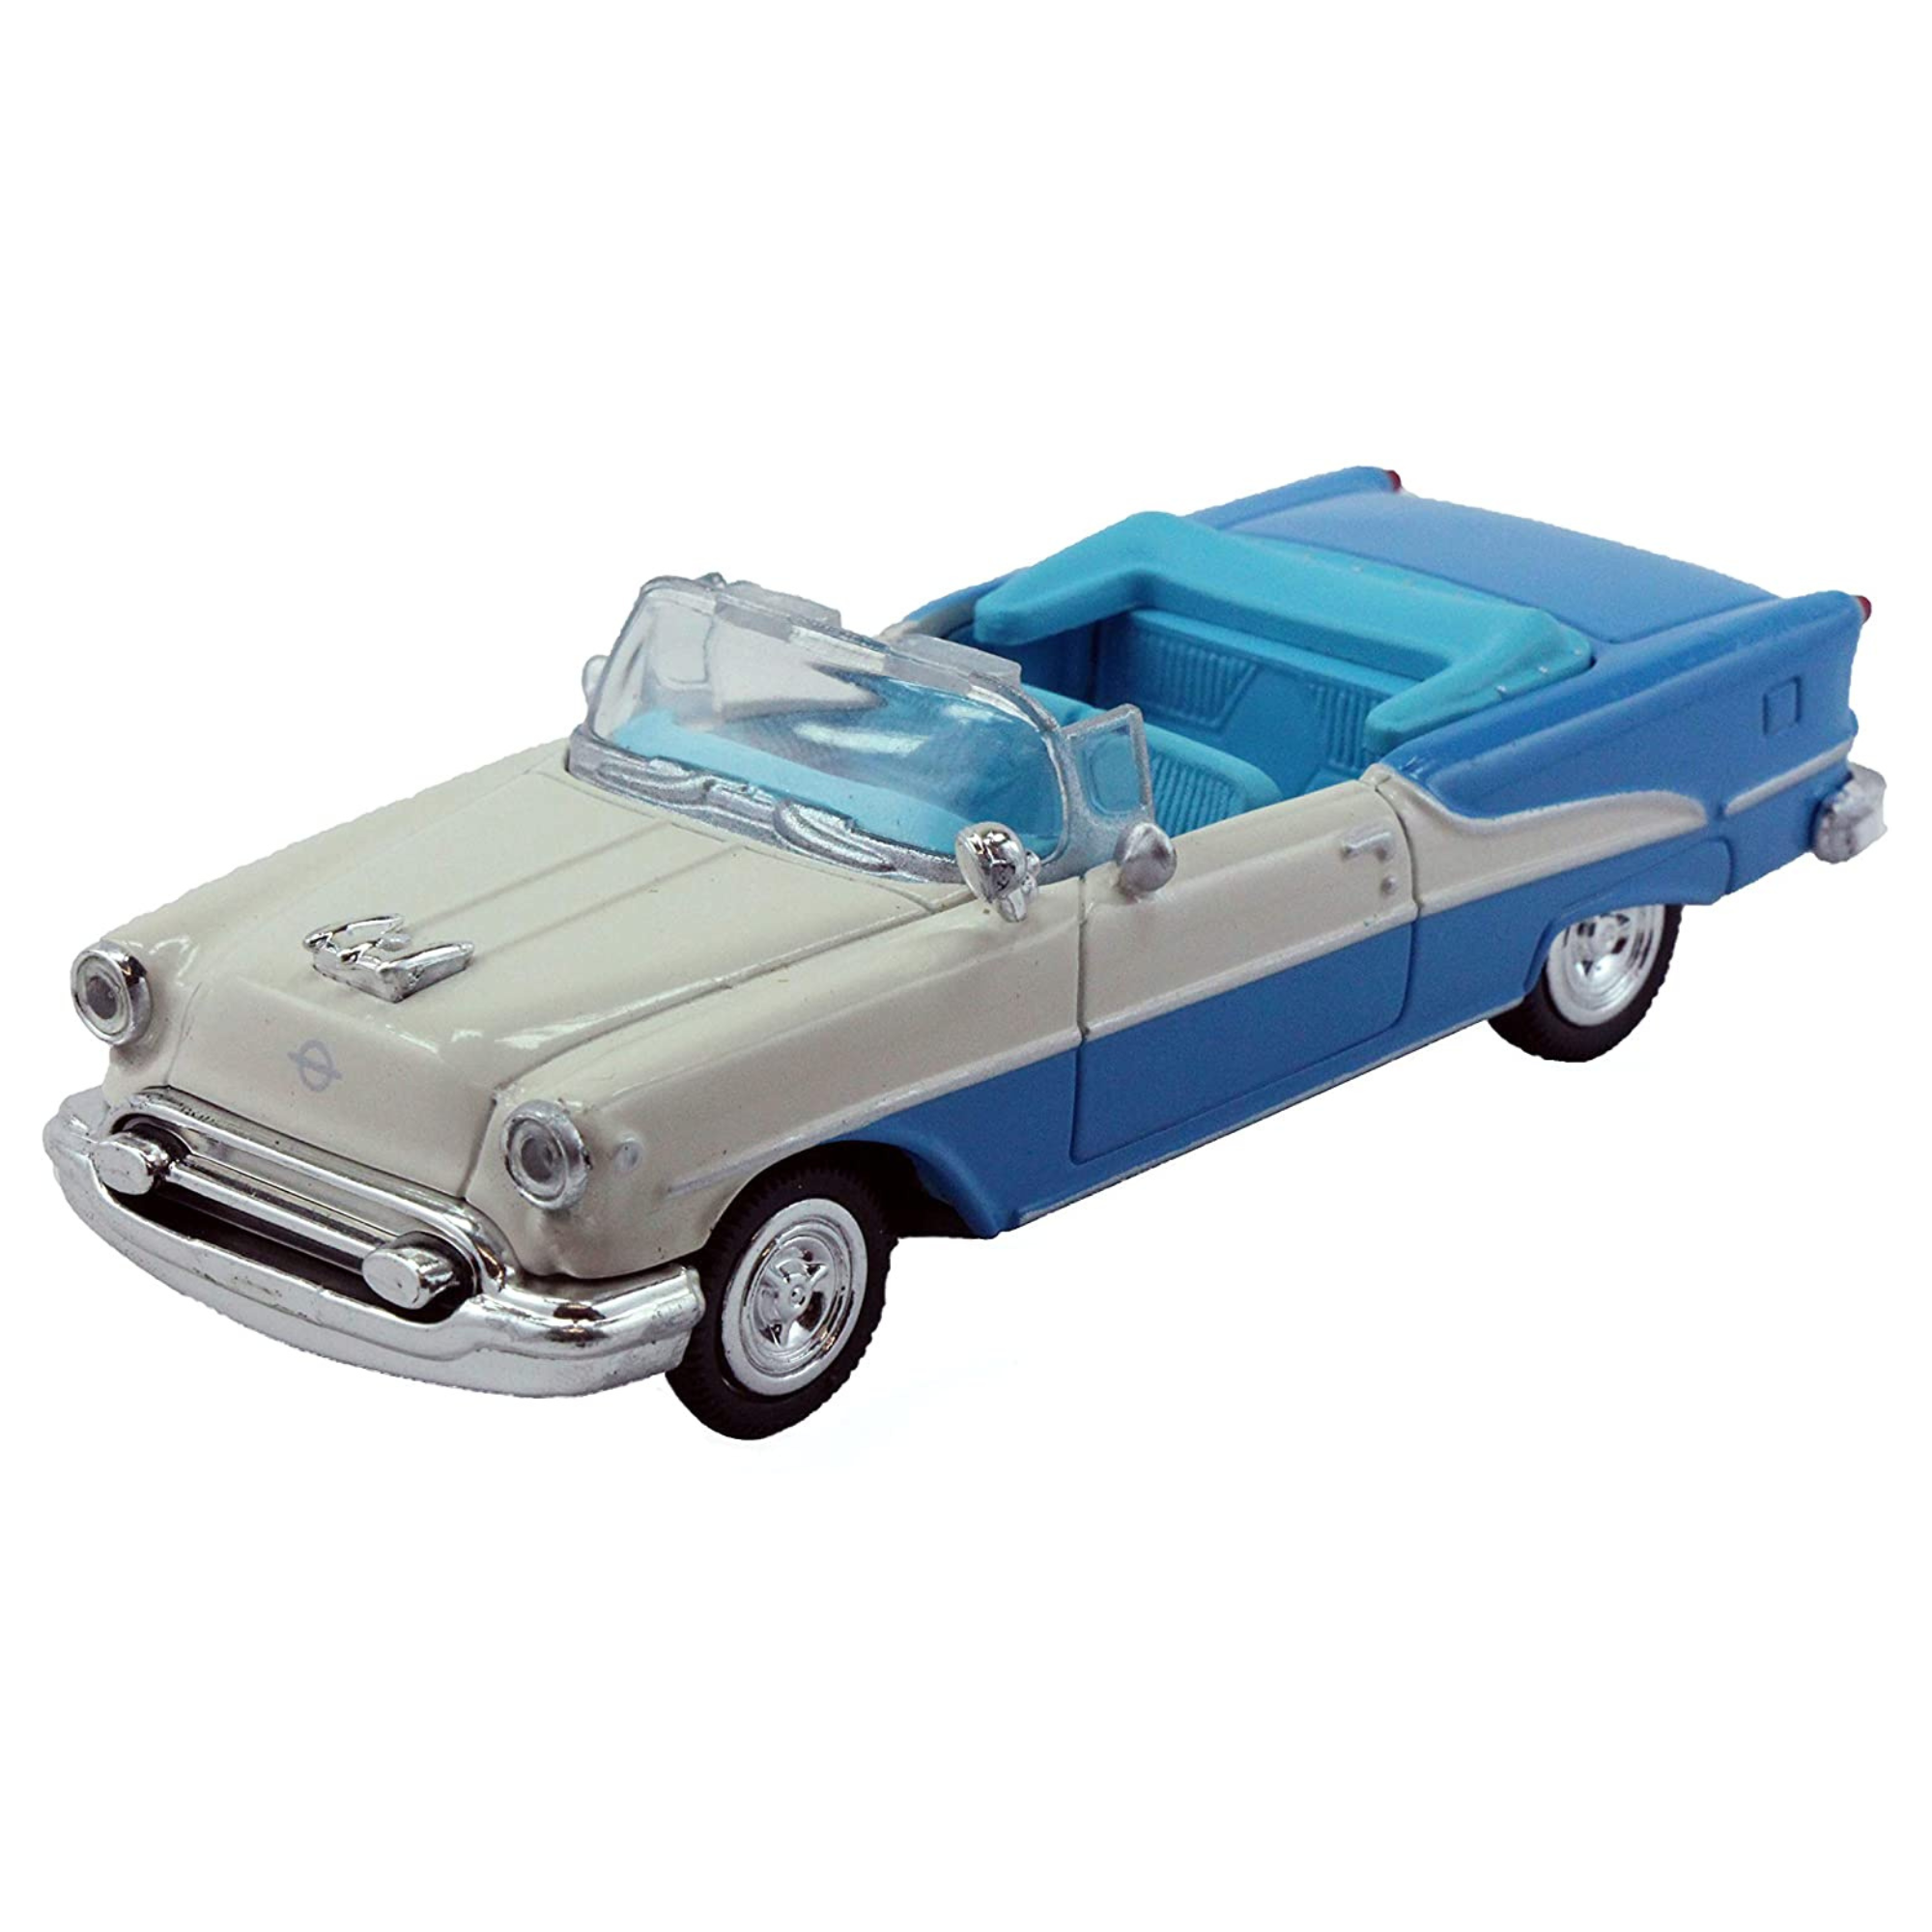 NewRay 1:43 Diecast 1955 Oldsmobile Super 88 Convertible - All American City Cruiser Collection - Toptoys2u